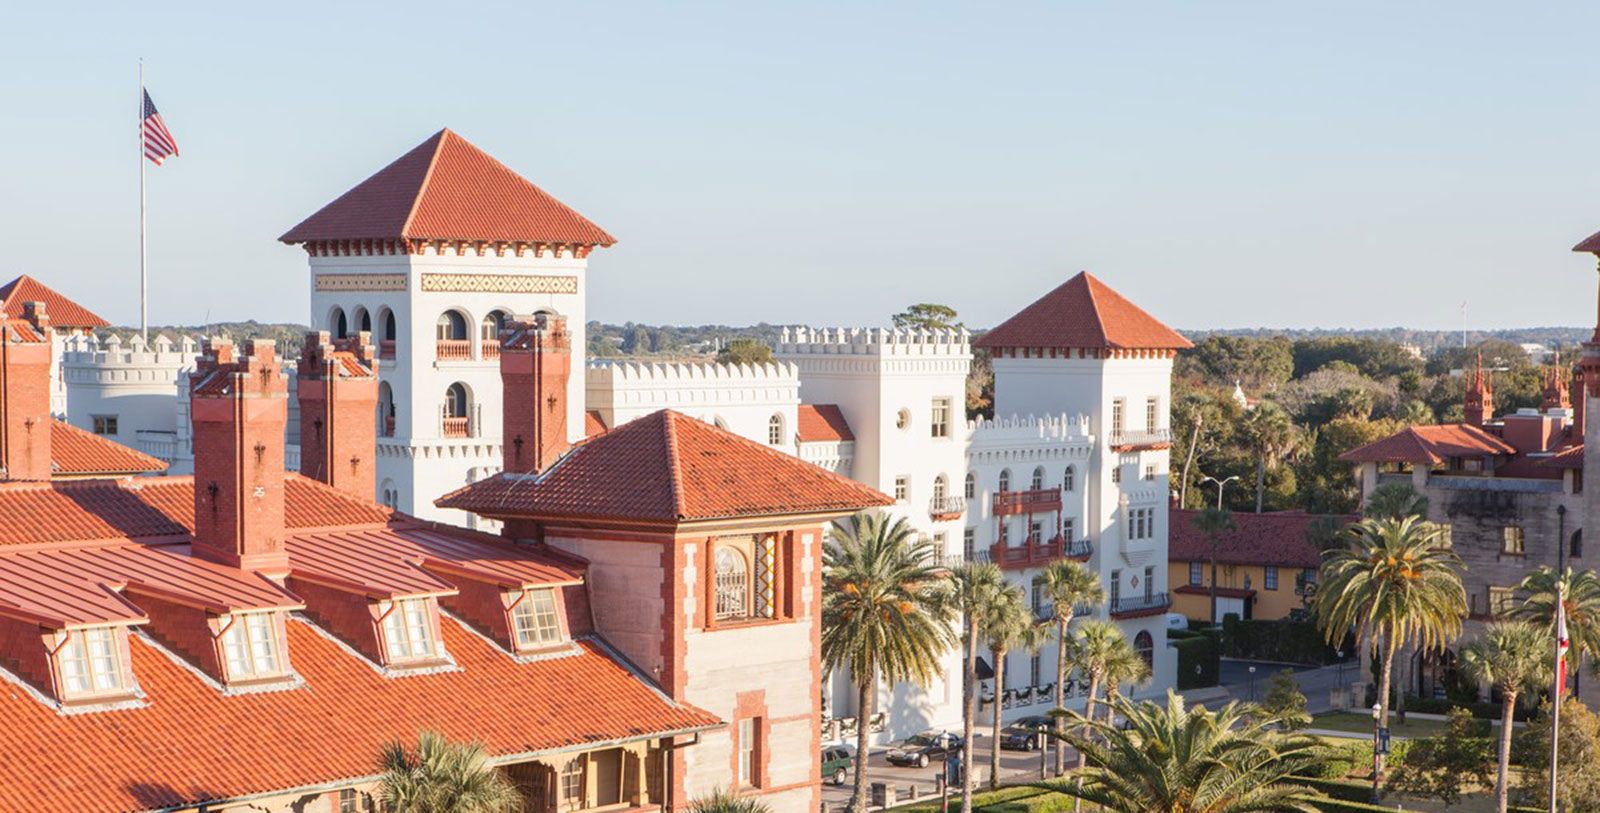 Discover the Lightner Museum, Old Town Trolley Tour, the St. Augustine Lighthouse & Maritime Museum, and the Castillo de San Marcos moments away.